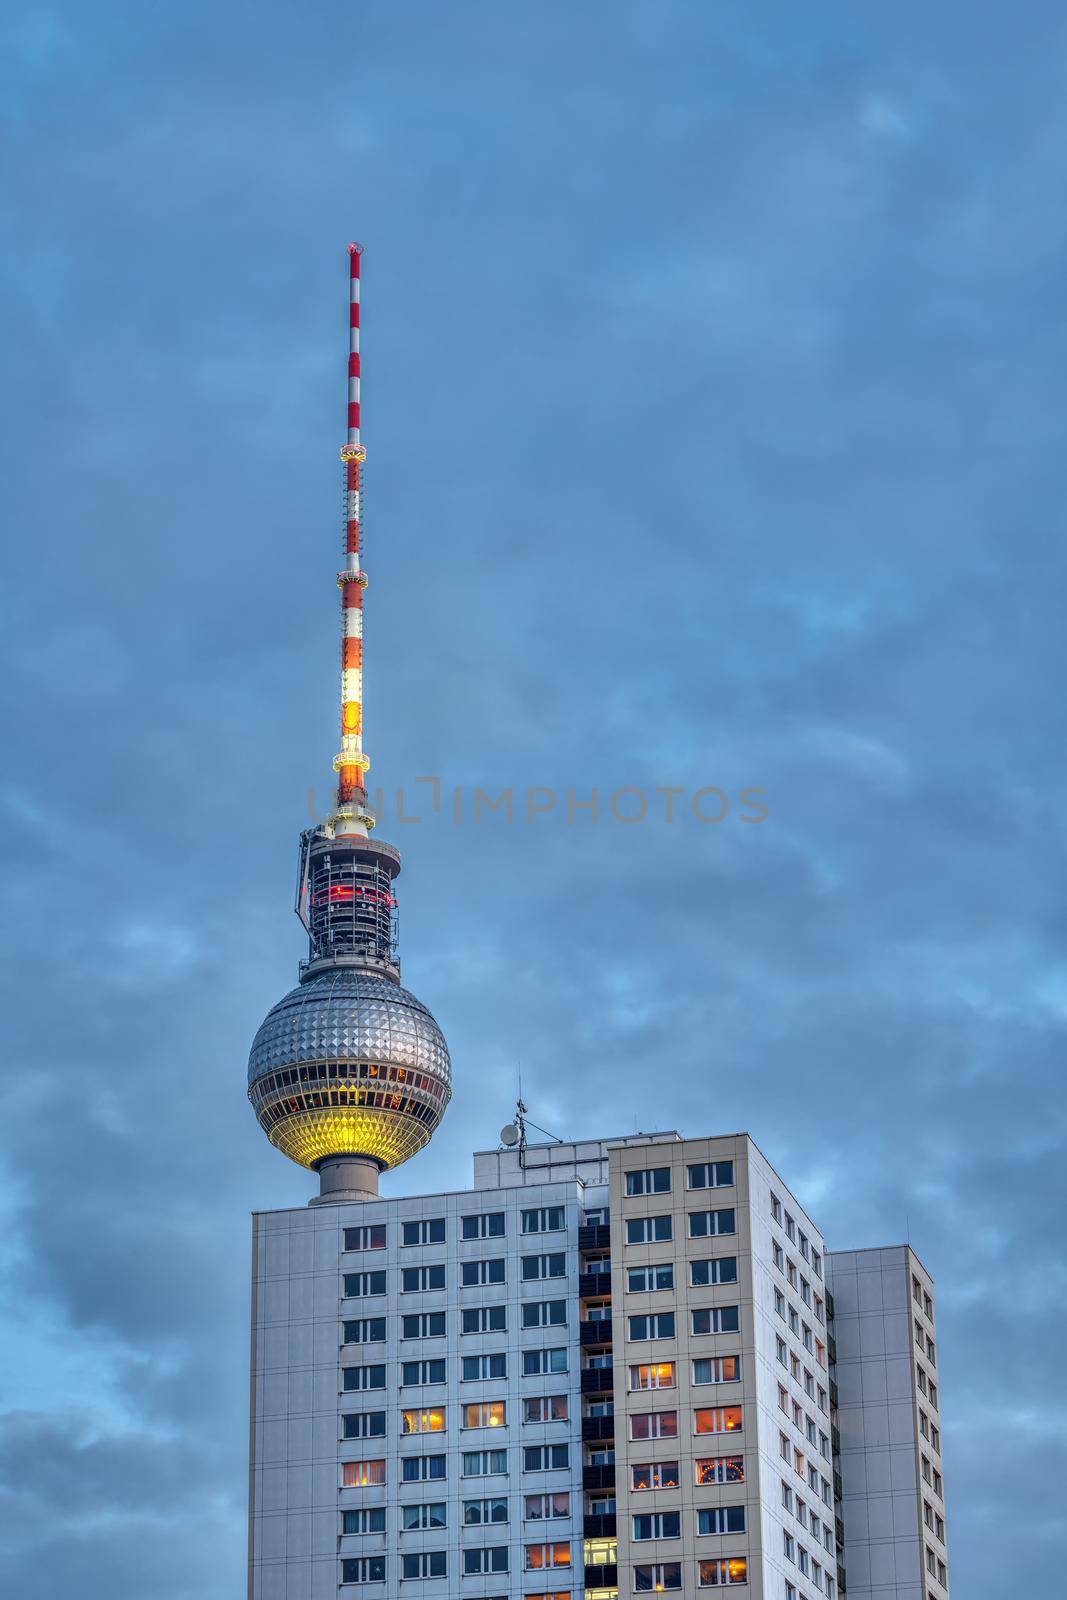 The famous TV Tower of Berlin at dusk by elxeneize